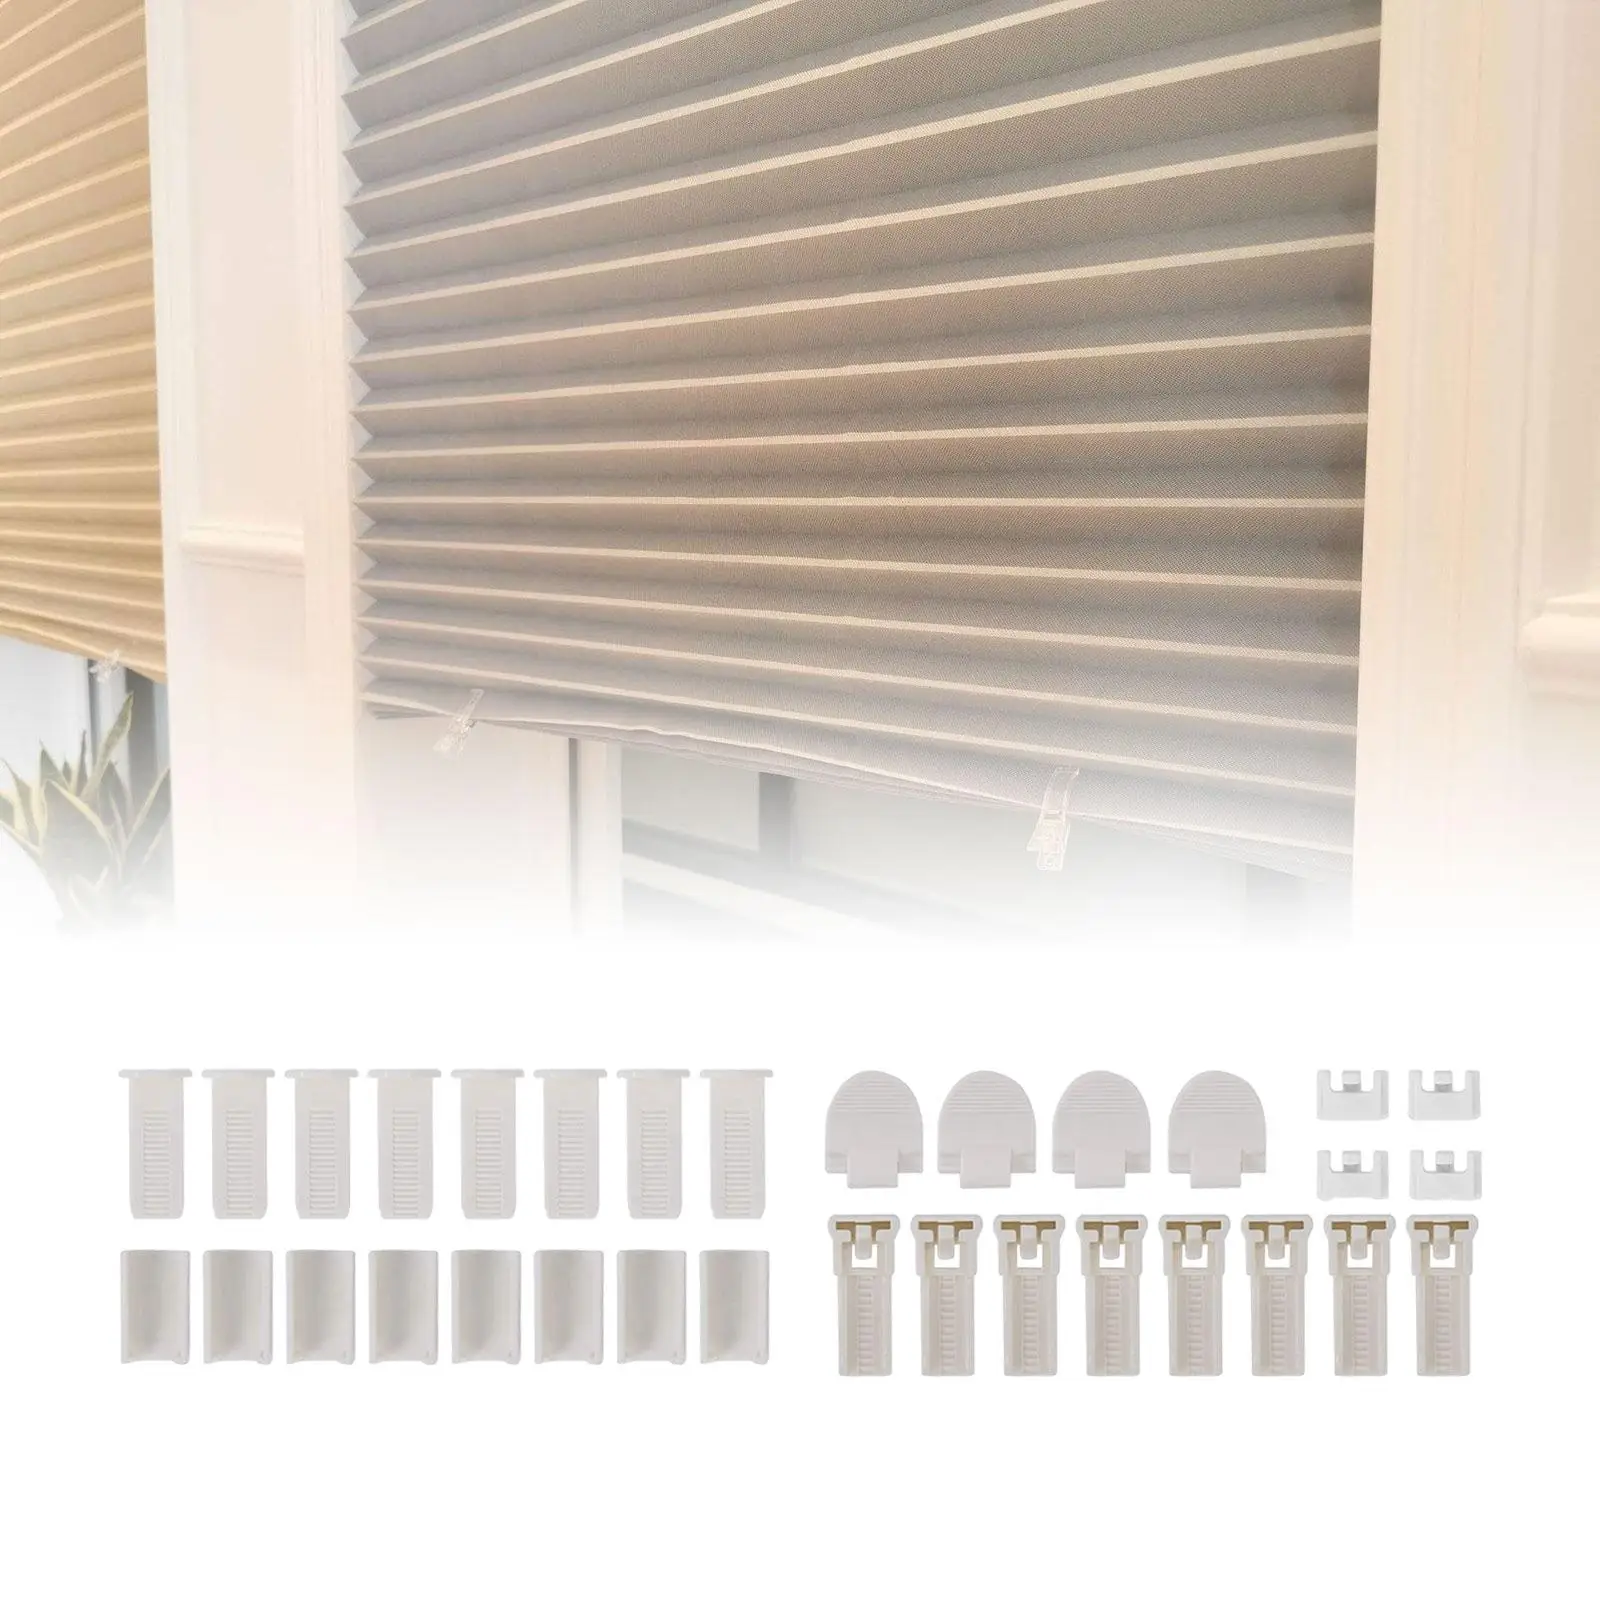 32x Vertical Blind Repair Set Easy to Use Vertical Blinds Replacement Slats